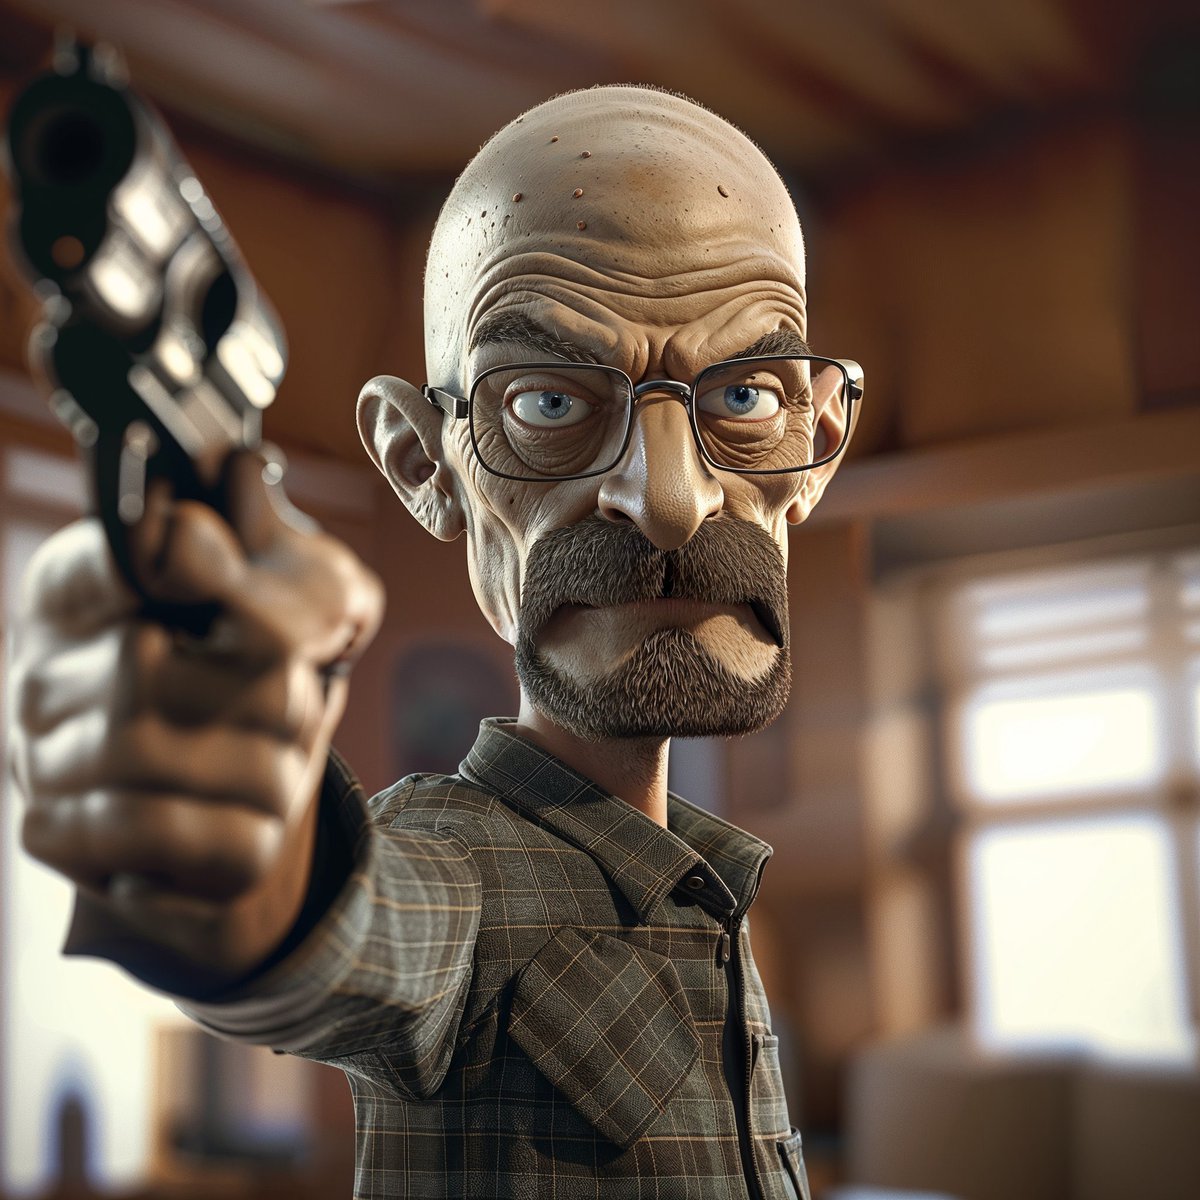 I used Midjourney v6 to create Pixar style versions of 10 different famous TV characters. The results are awesome. 1. Walter White from Breaking Bad